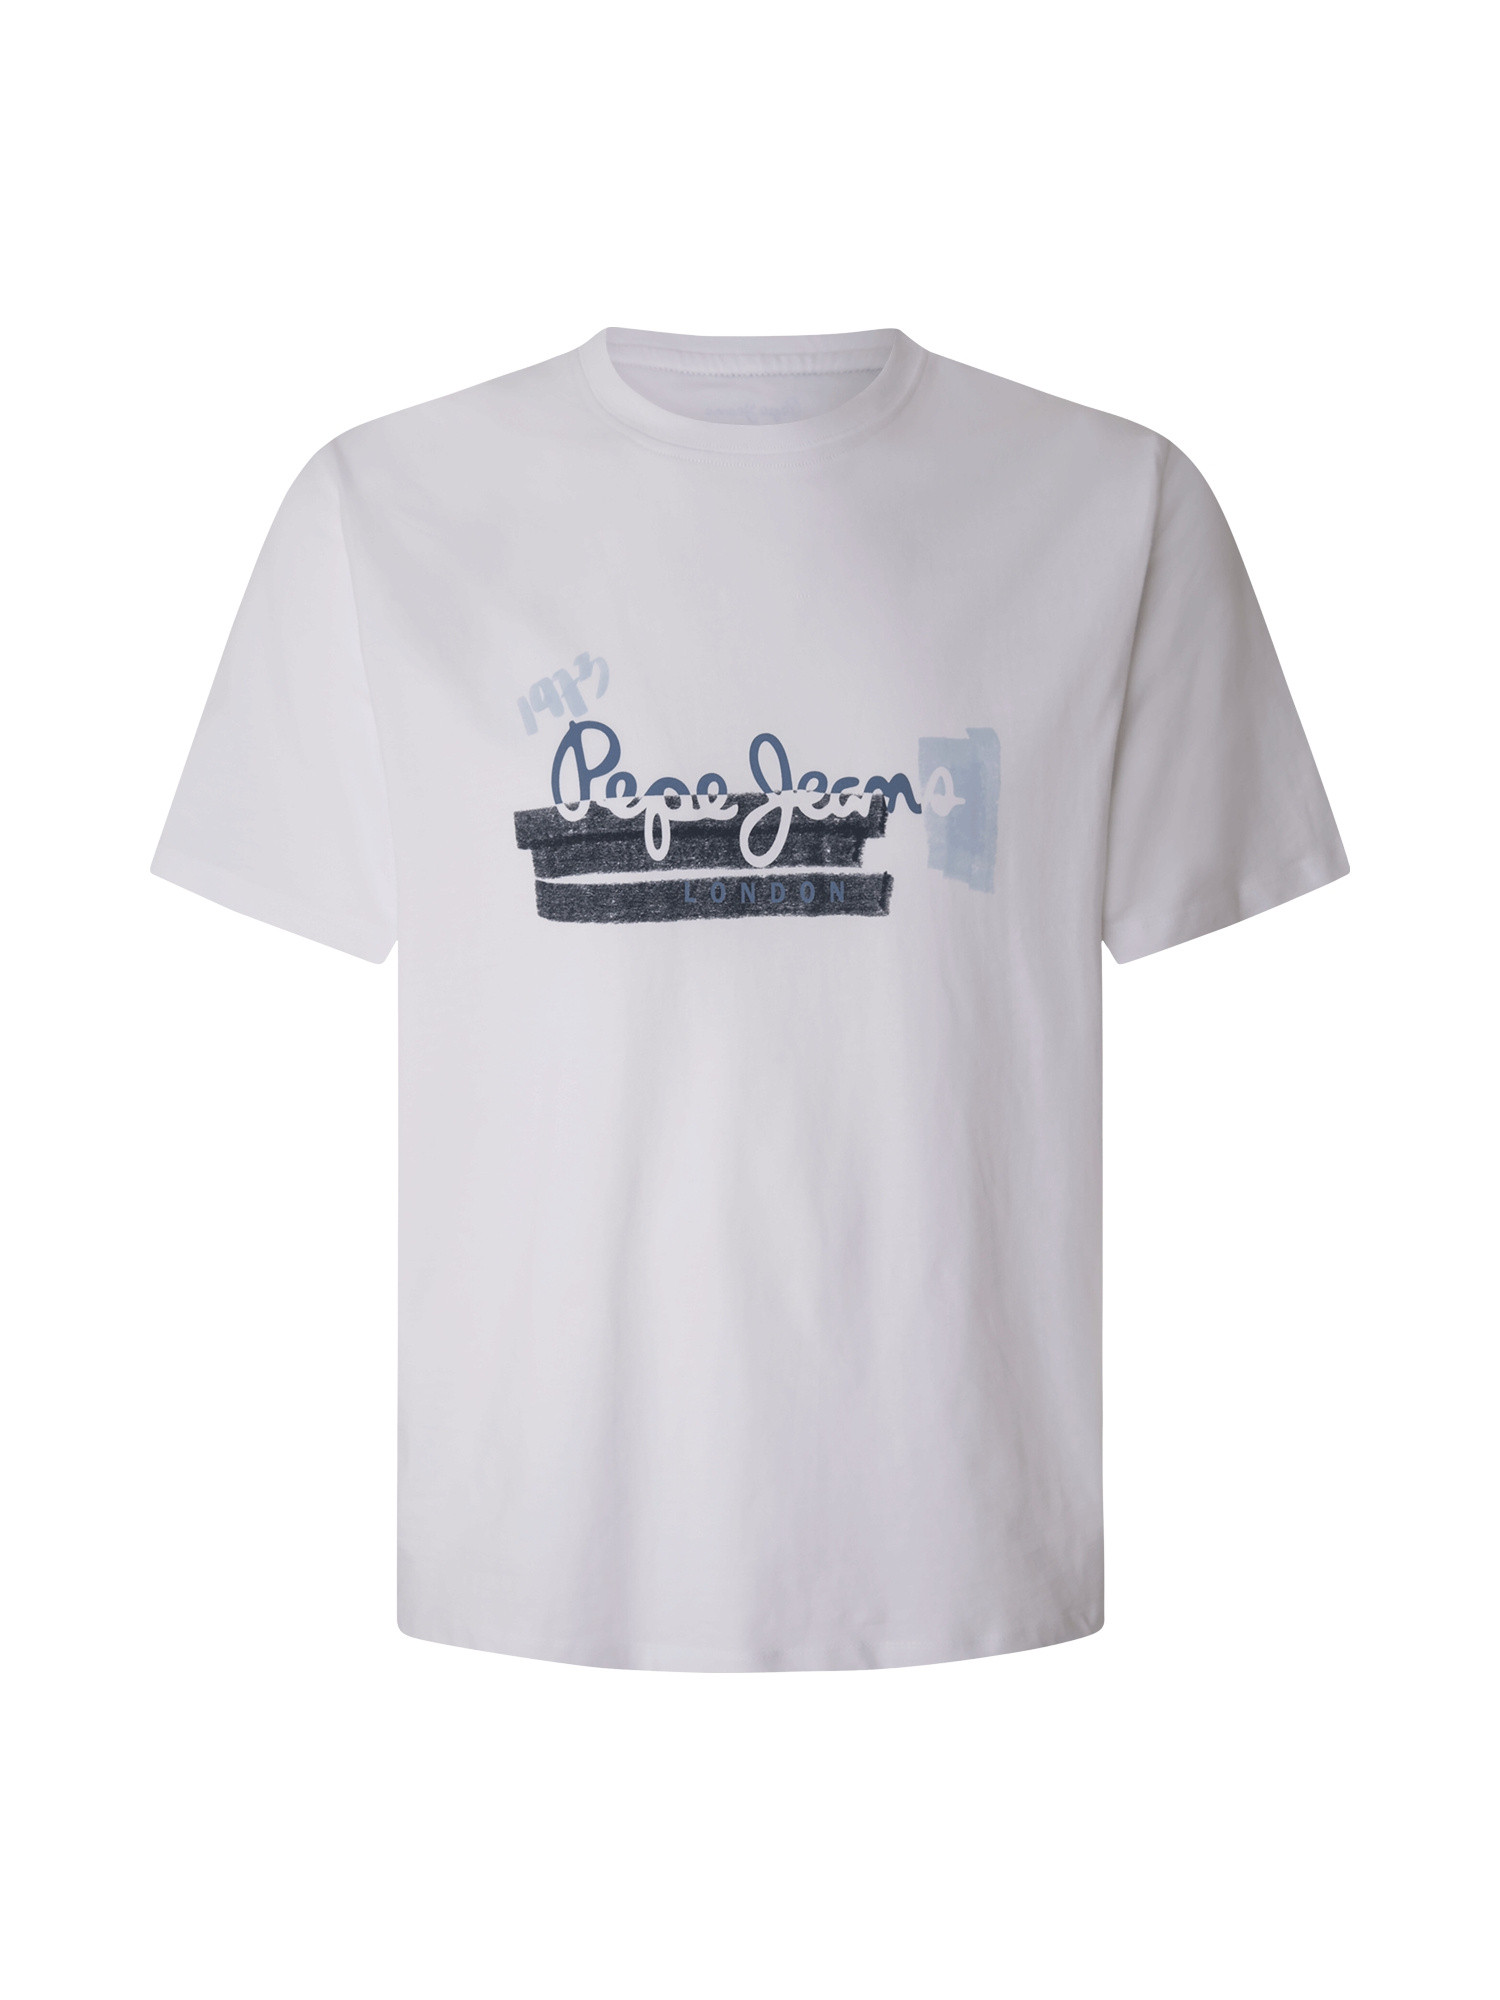 Pepe Jeans - T-shirt con stampa in cotone, Bianco, large image number 0